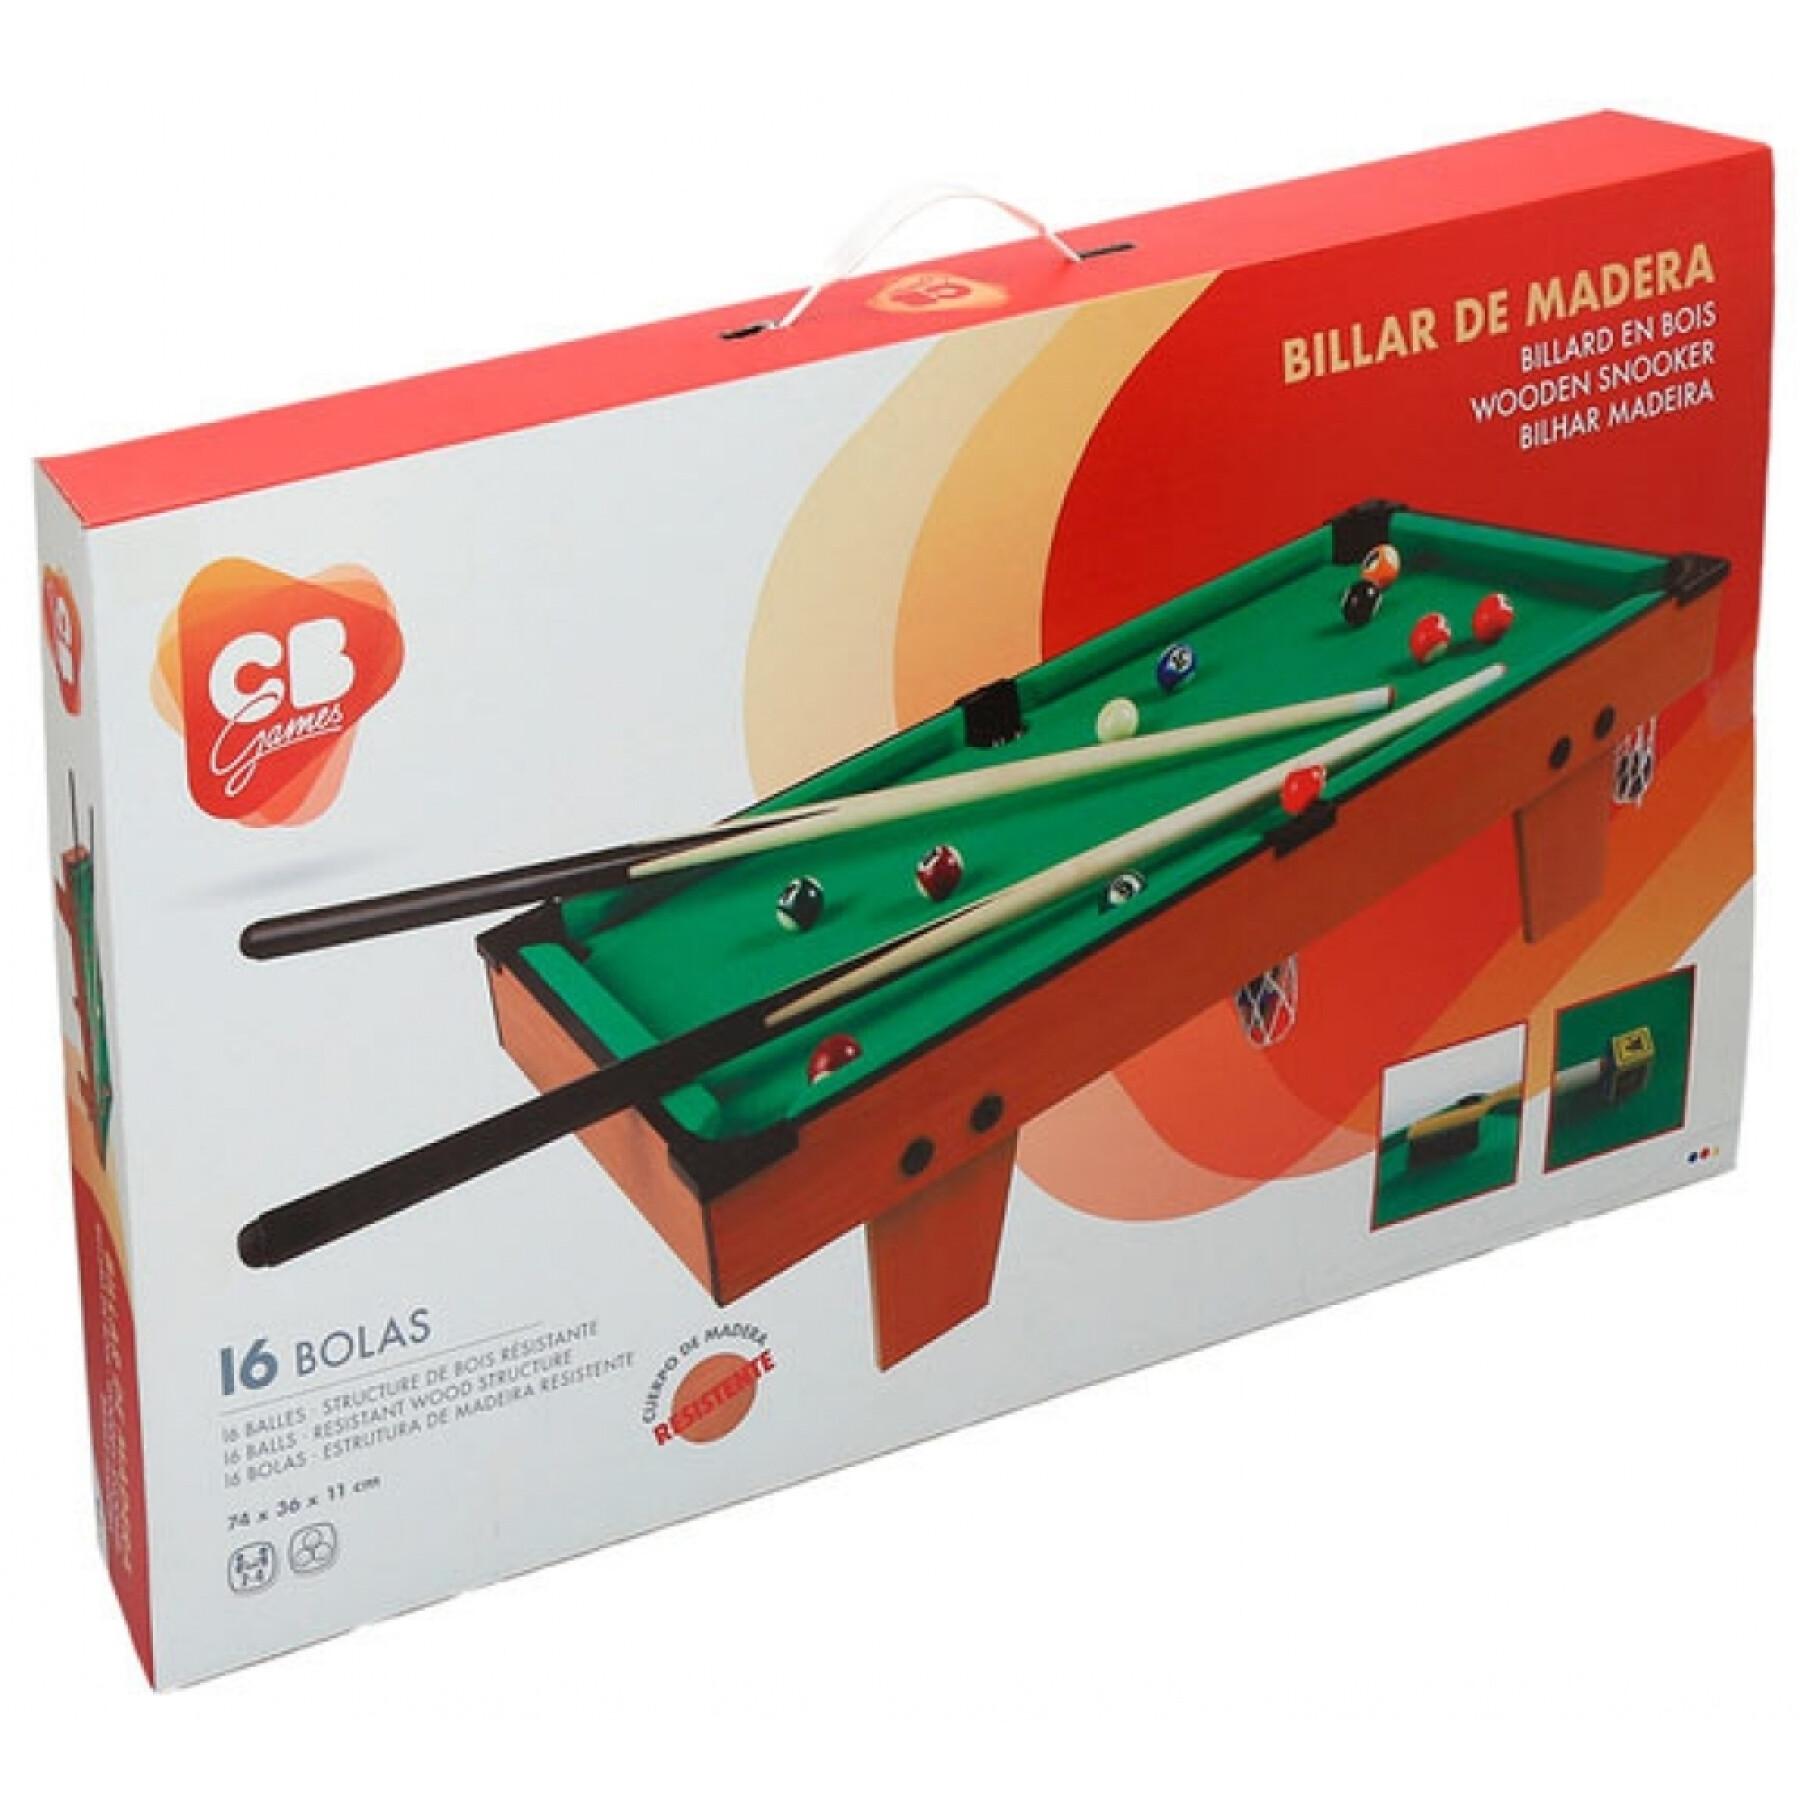 Wooden pool table CB Games